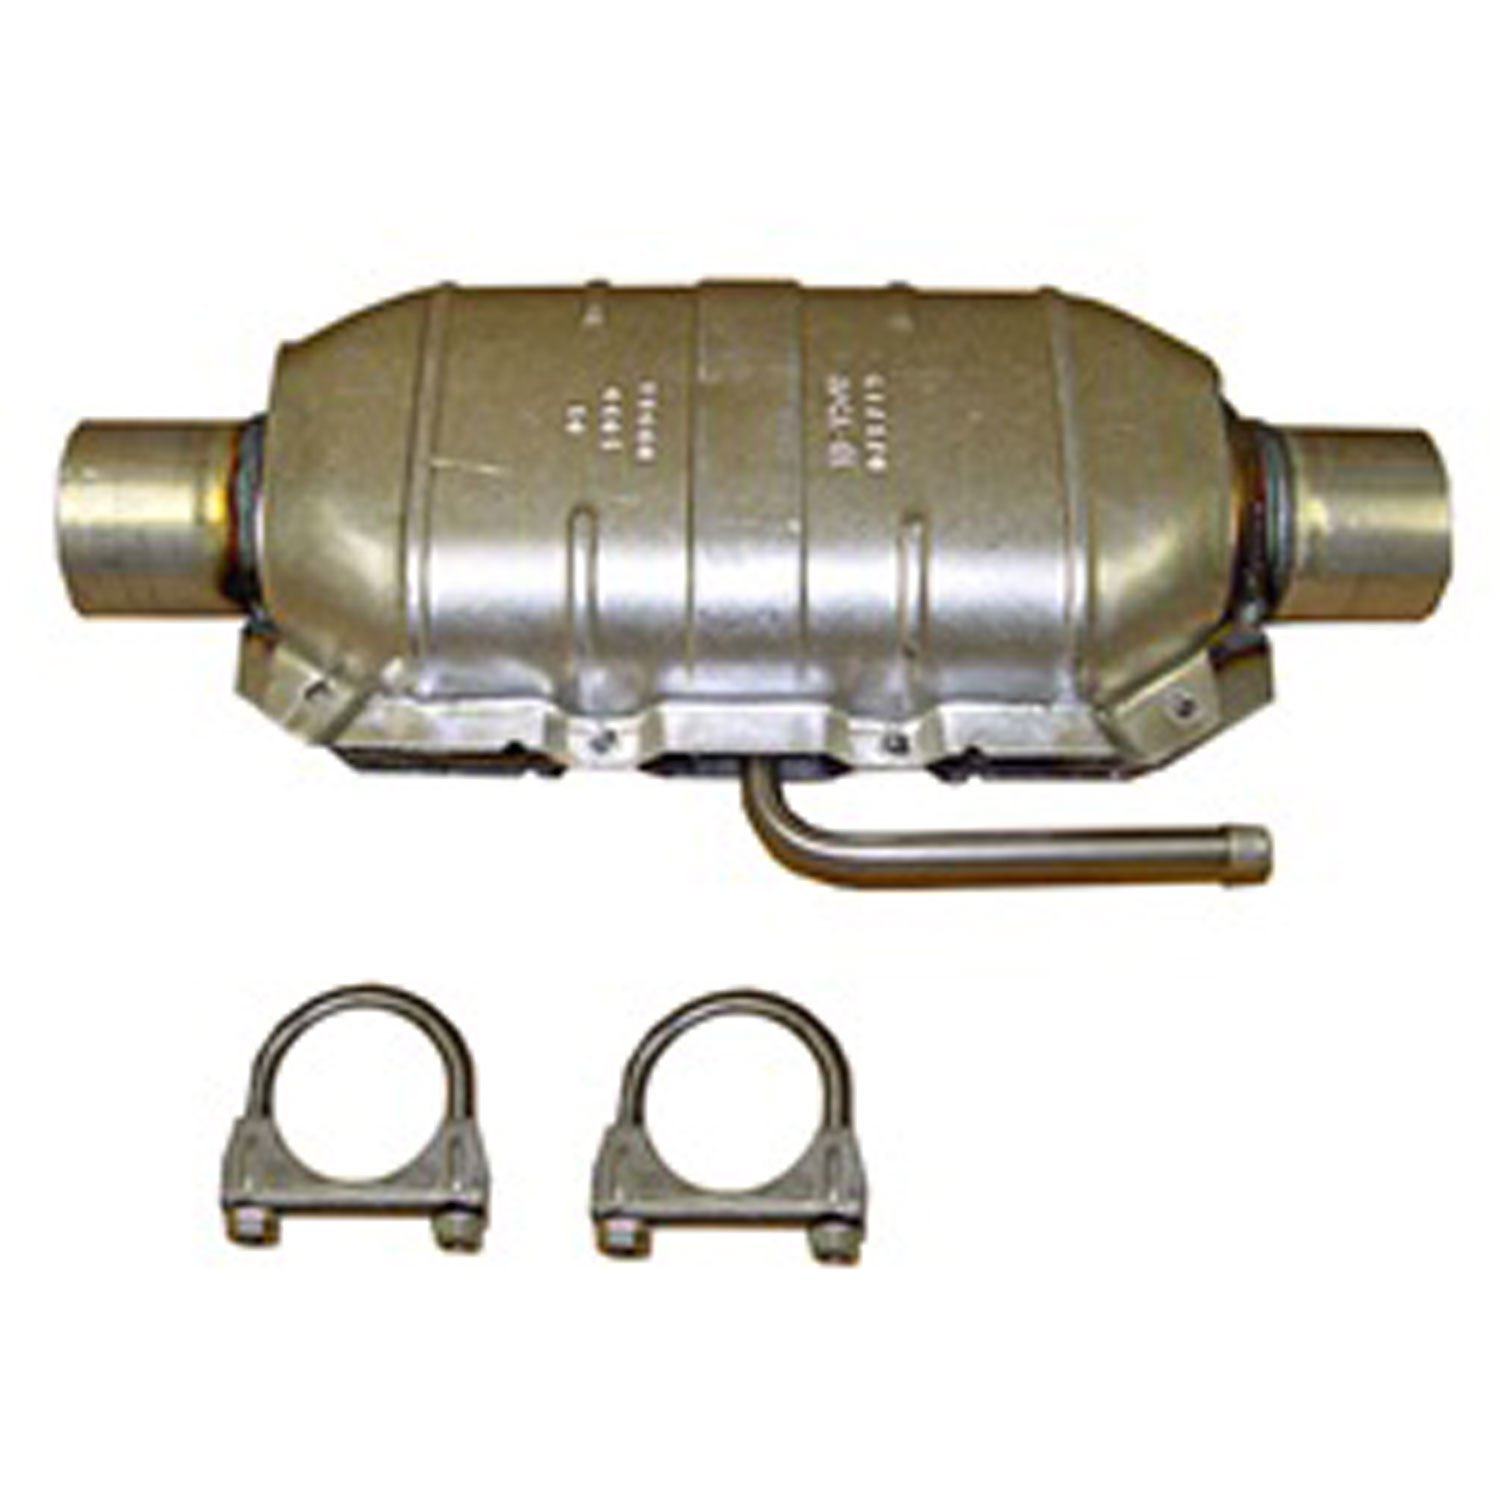 Replacement catalytic converter from Omix-ADA, Fits 75-78 Jeep CJ5 and CJ7 with a 232 258 and 304 cubic inch engines.